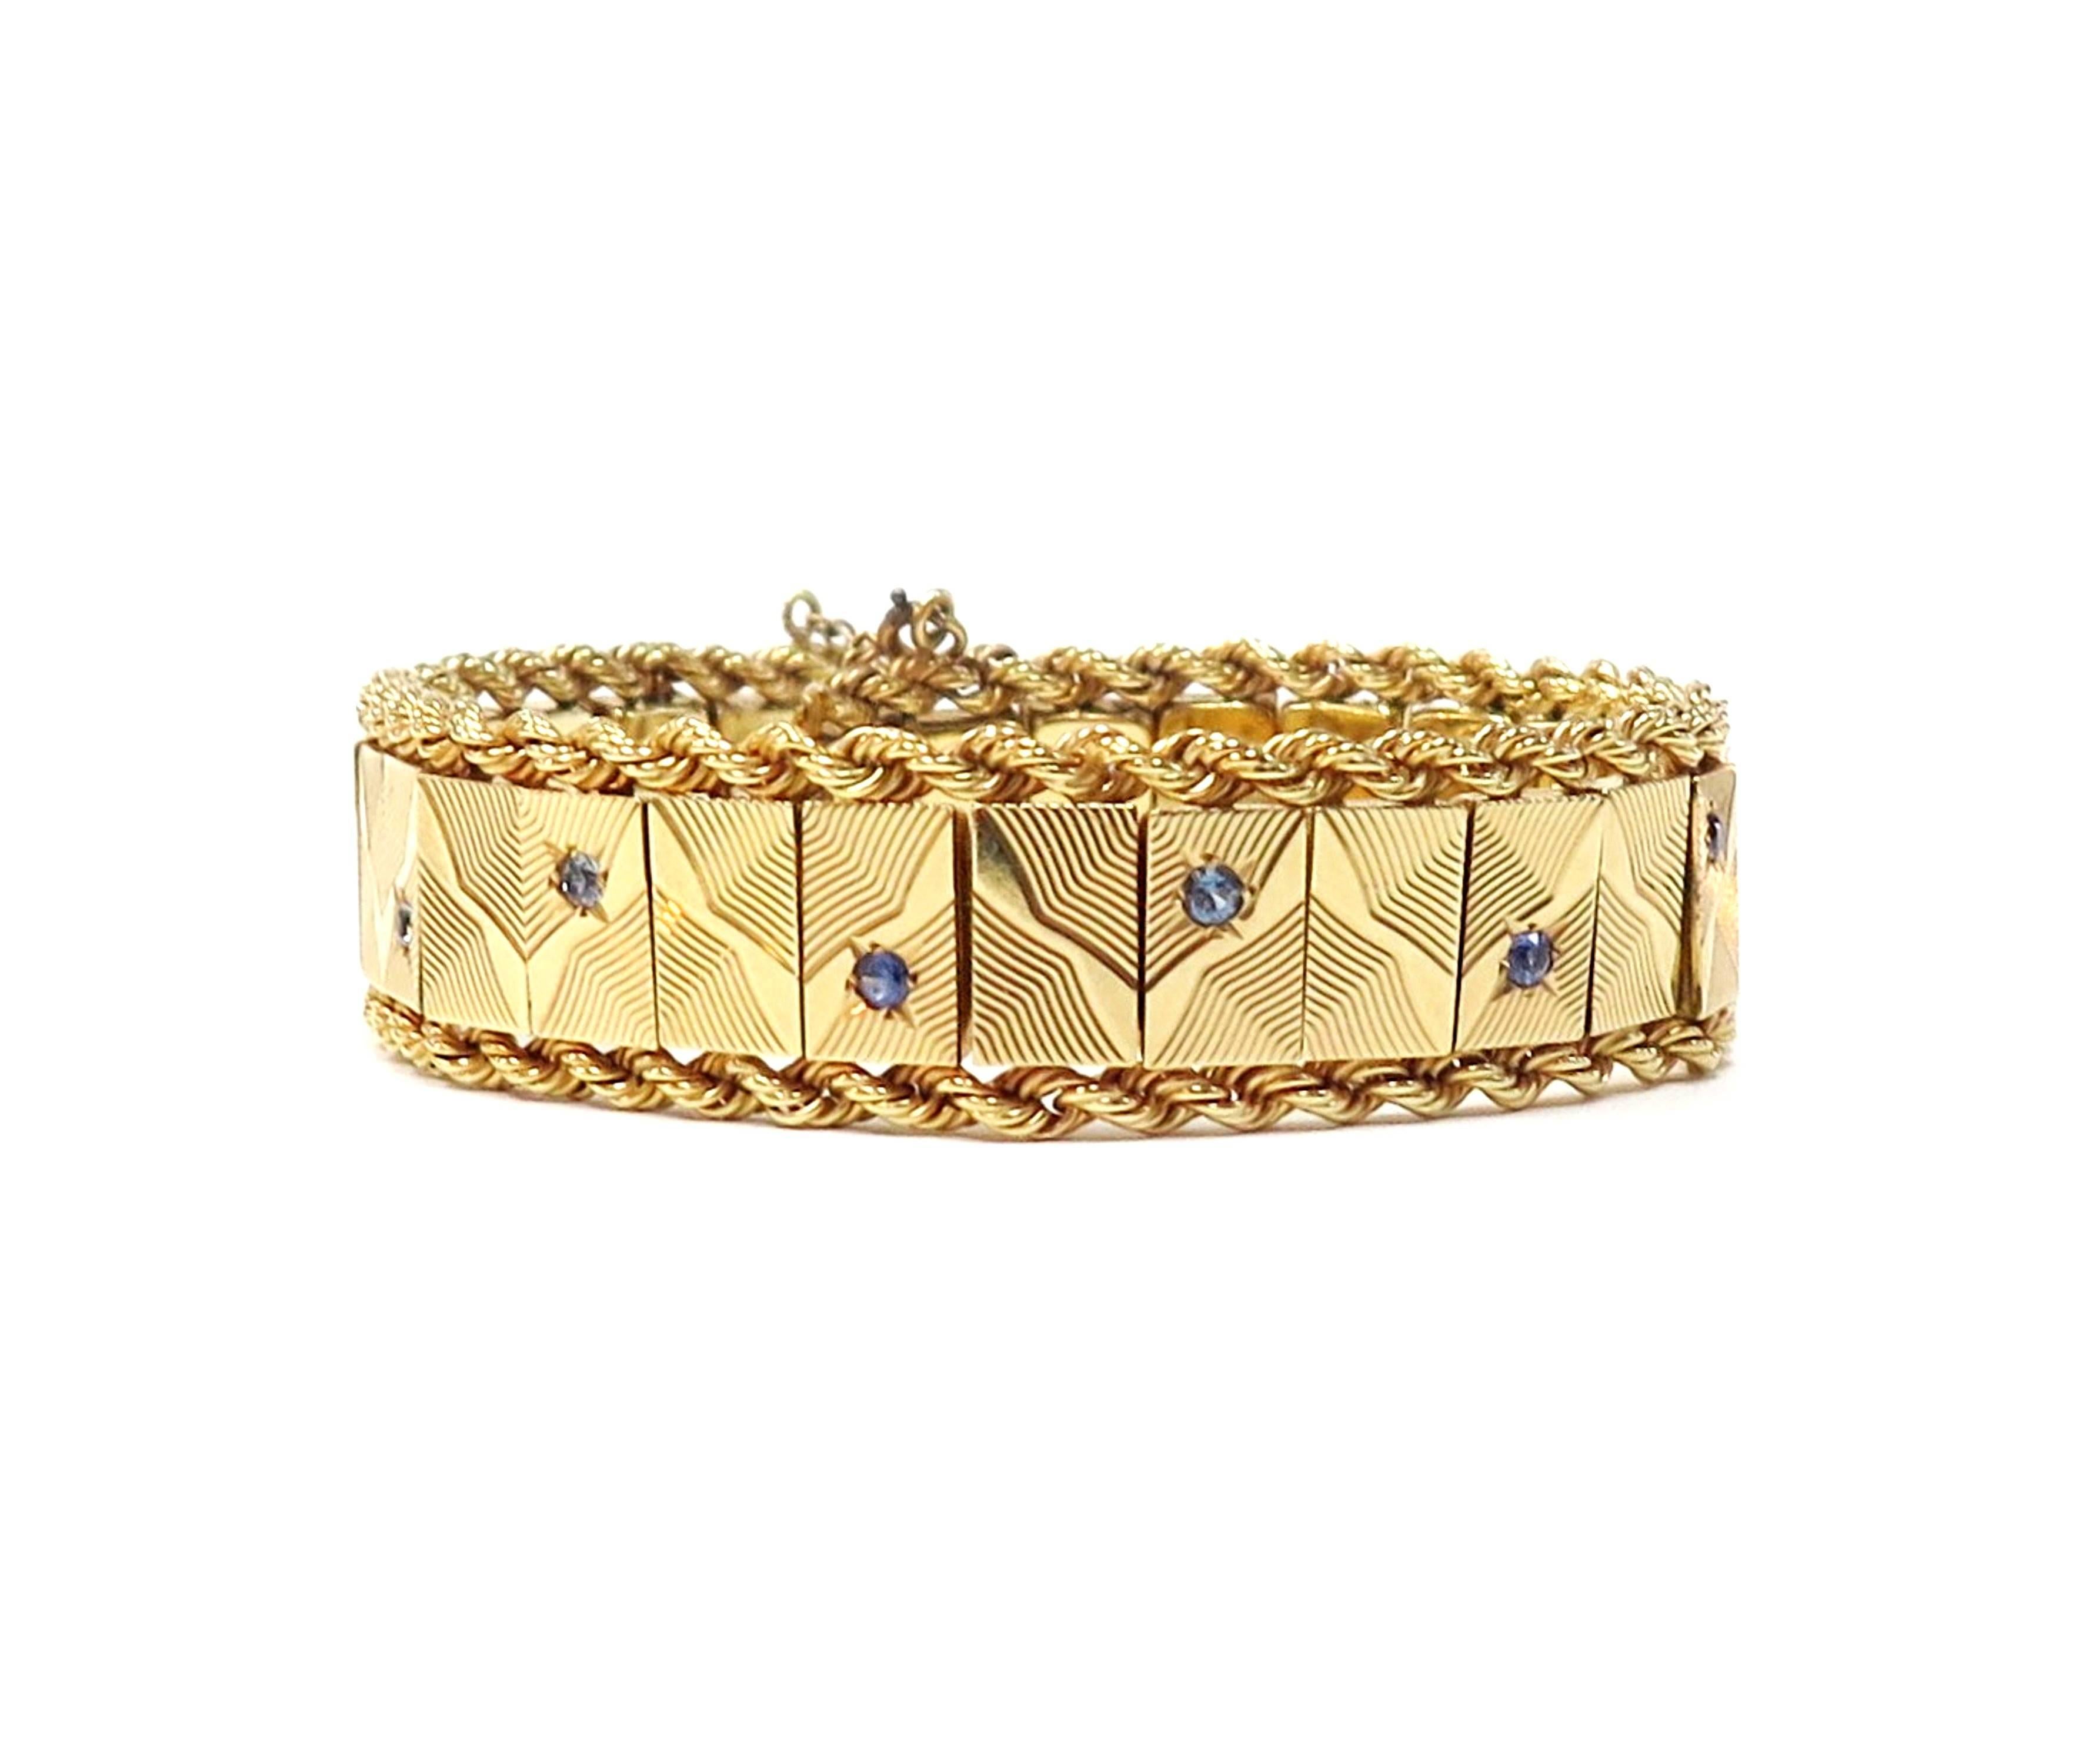 A wavy textured design on rectangular panels is punctuated in 1/2 inch intervals by bright blue faceted round sapphires in this flexible bracelet rendered in rich 14K yellow gold and bordered on each side with rope chain. 

Has a safety chain.

